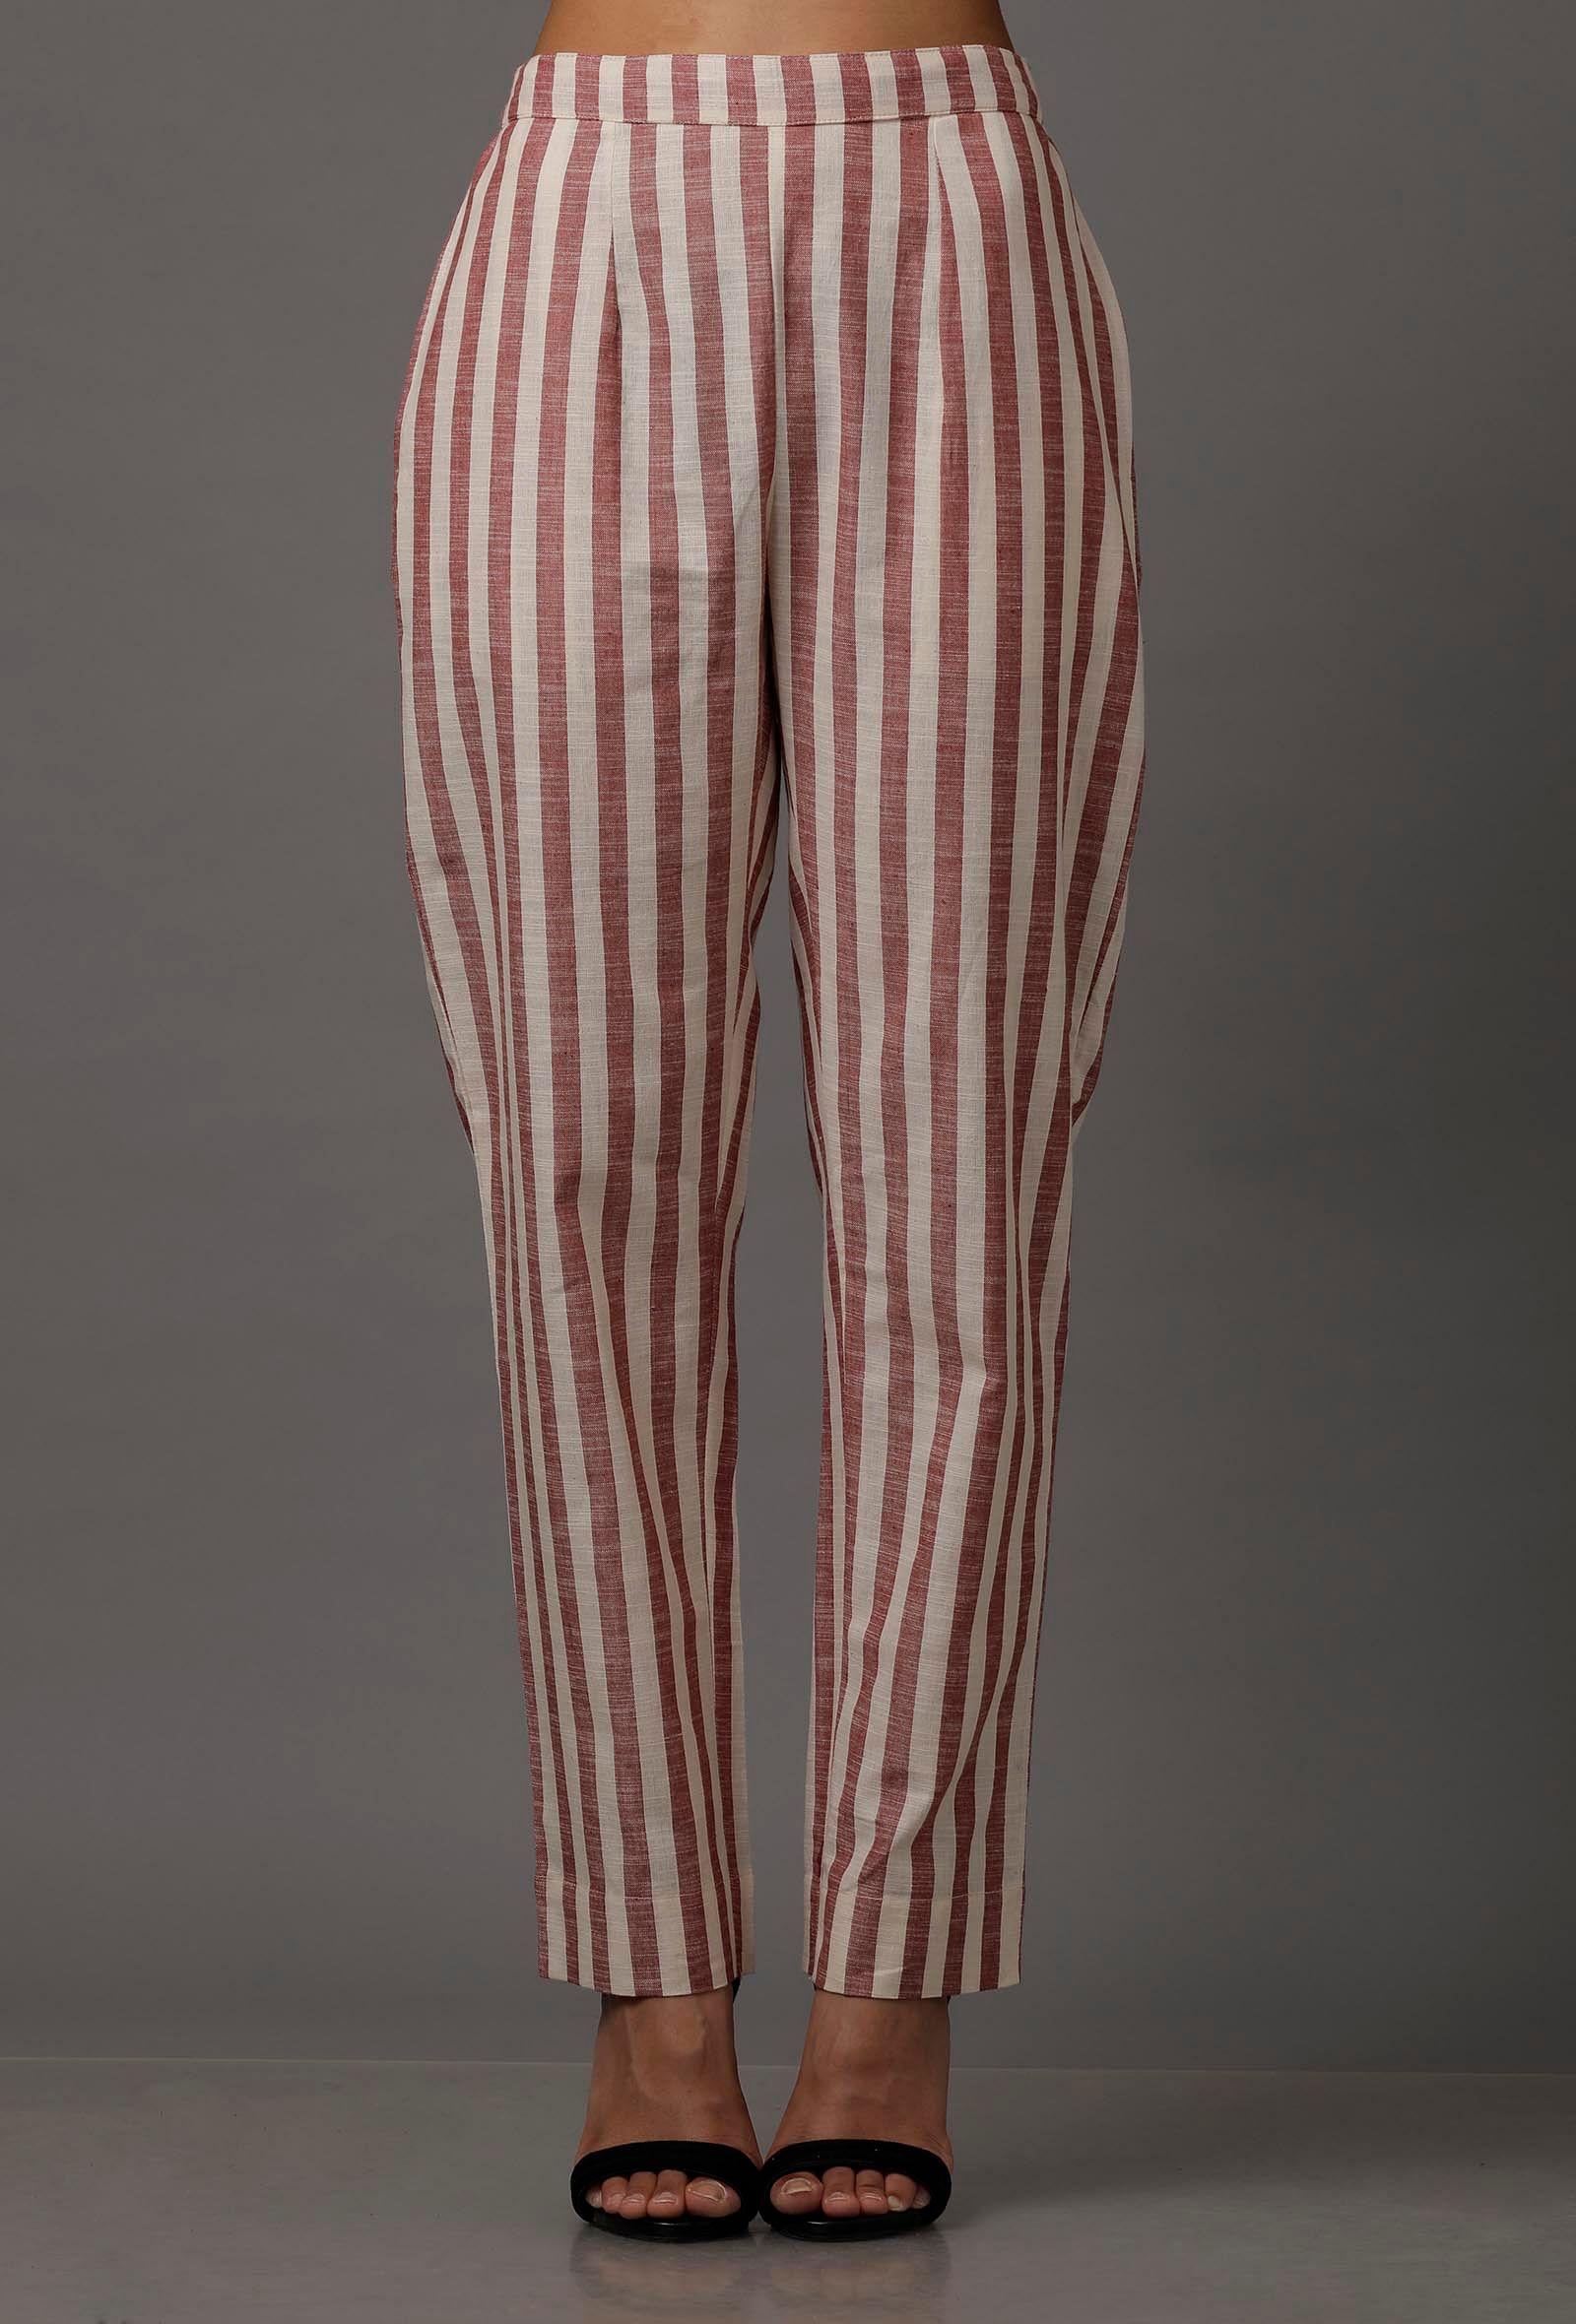 Red and White Stripes Pure Woven Cotton Pants